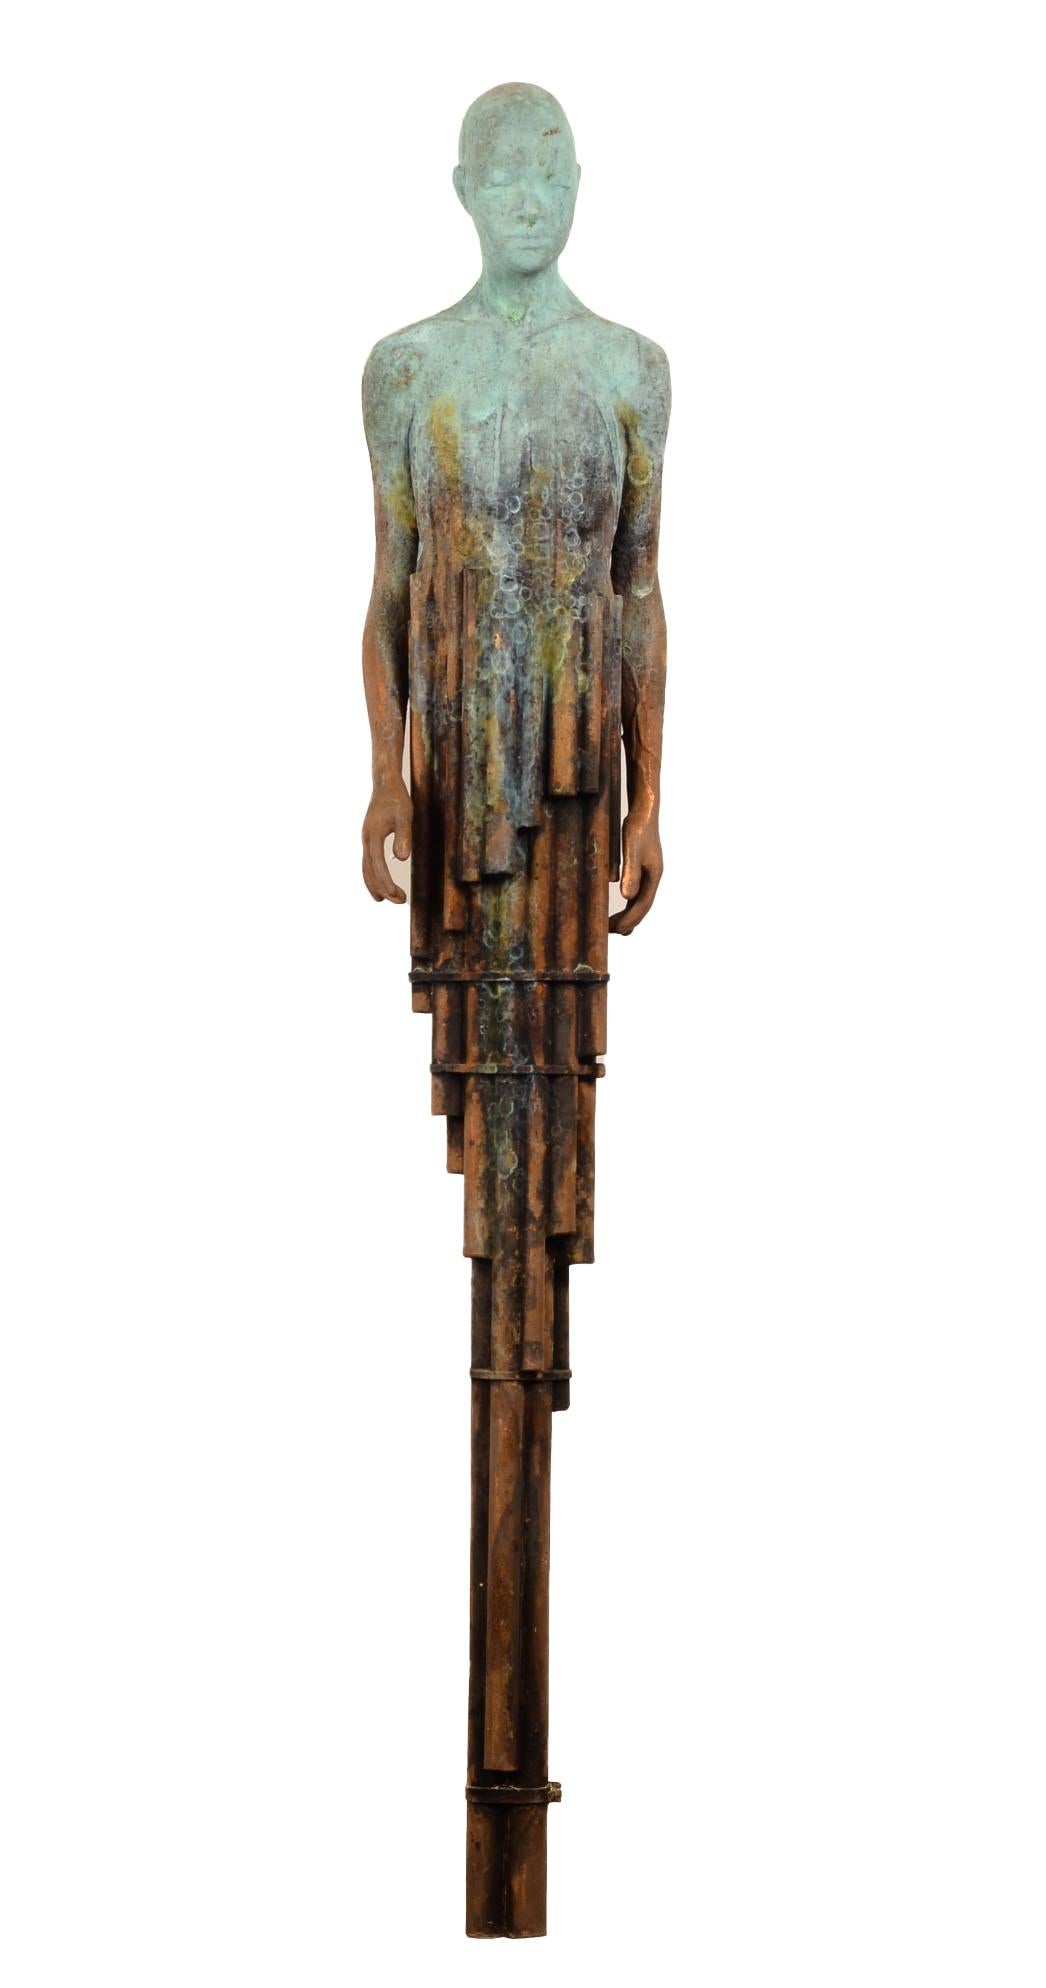 Tube II - Wall Mounted Bronze Sculpture with Human Form and Lush Patina